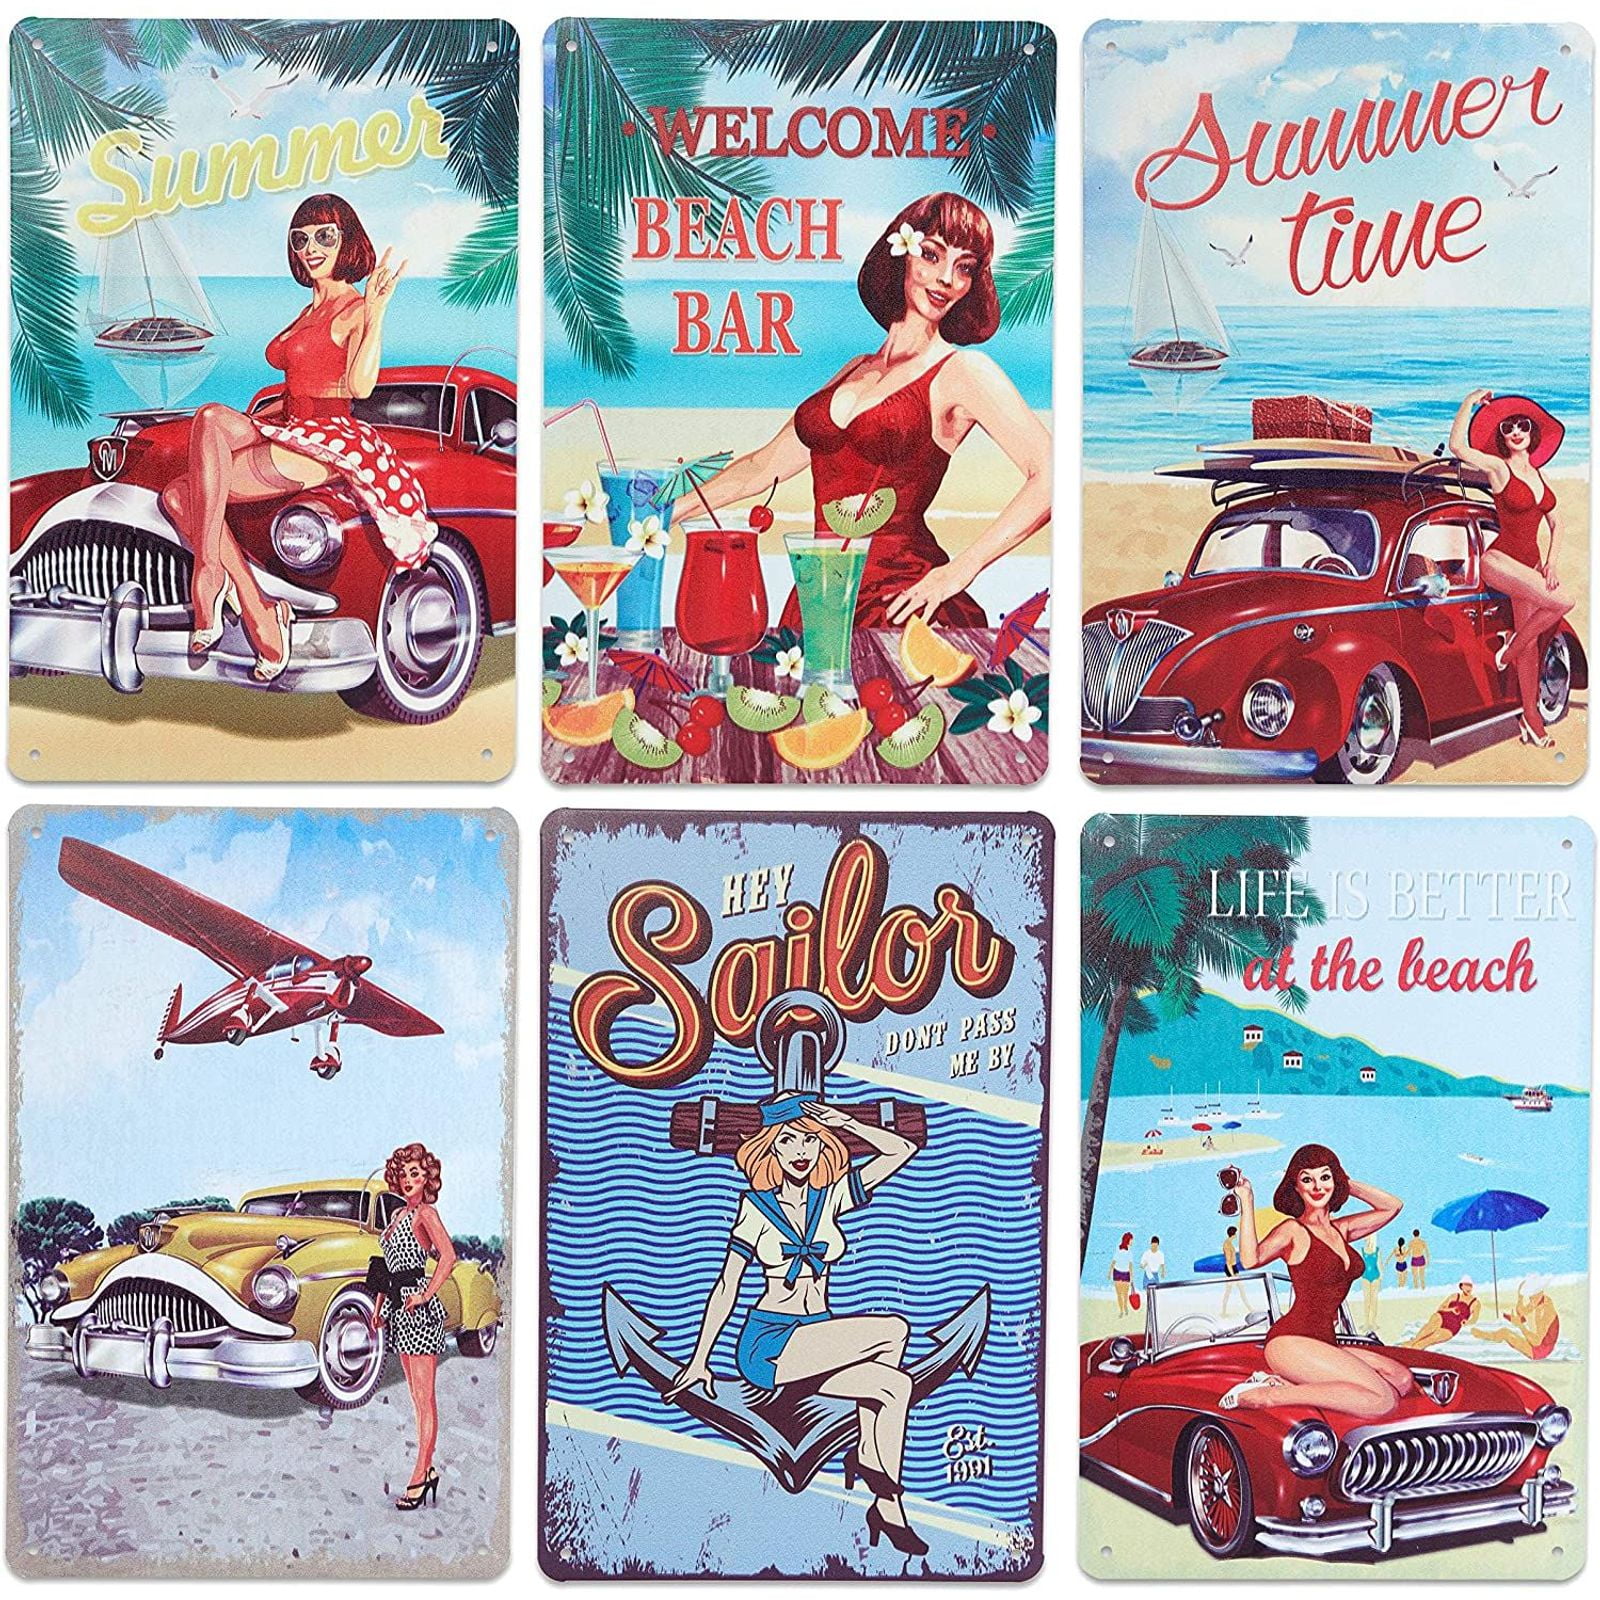 Applying My Make Up classic vintage pinup METAL TIN SIGN POSTER WALL PLAQUE 